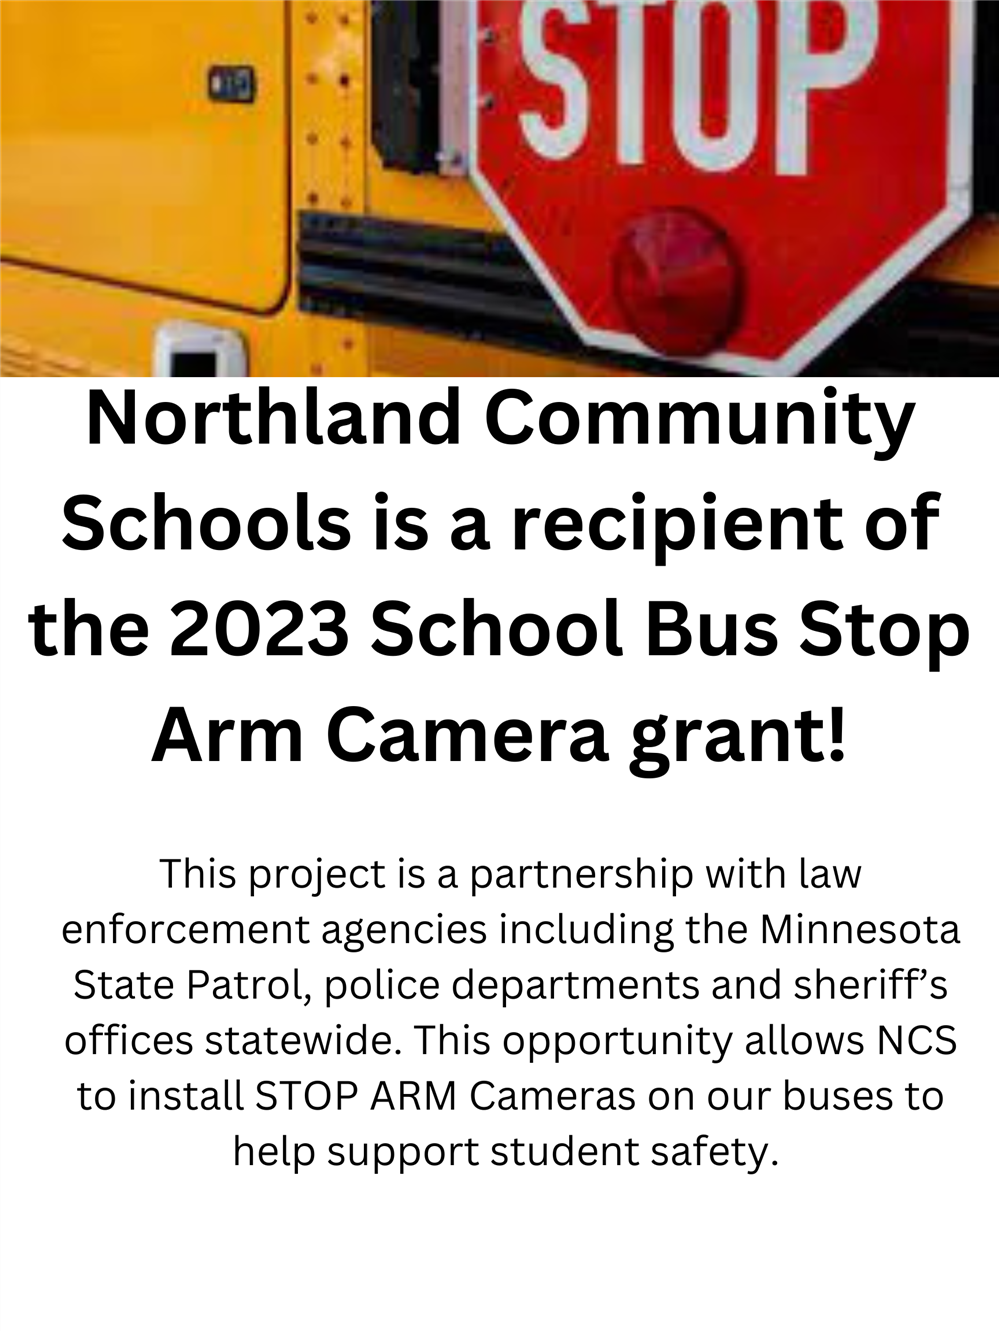  NCS is a recipient of the 2023 School Bus Stop Arm Camera grant